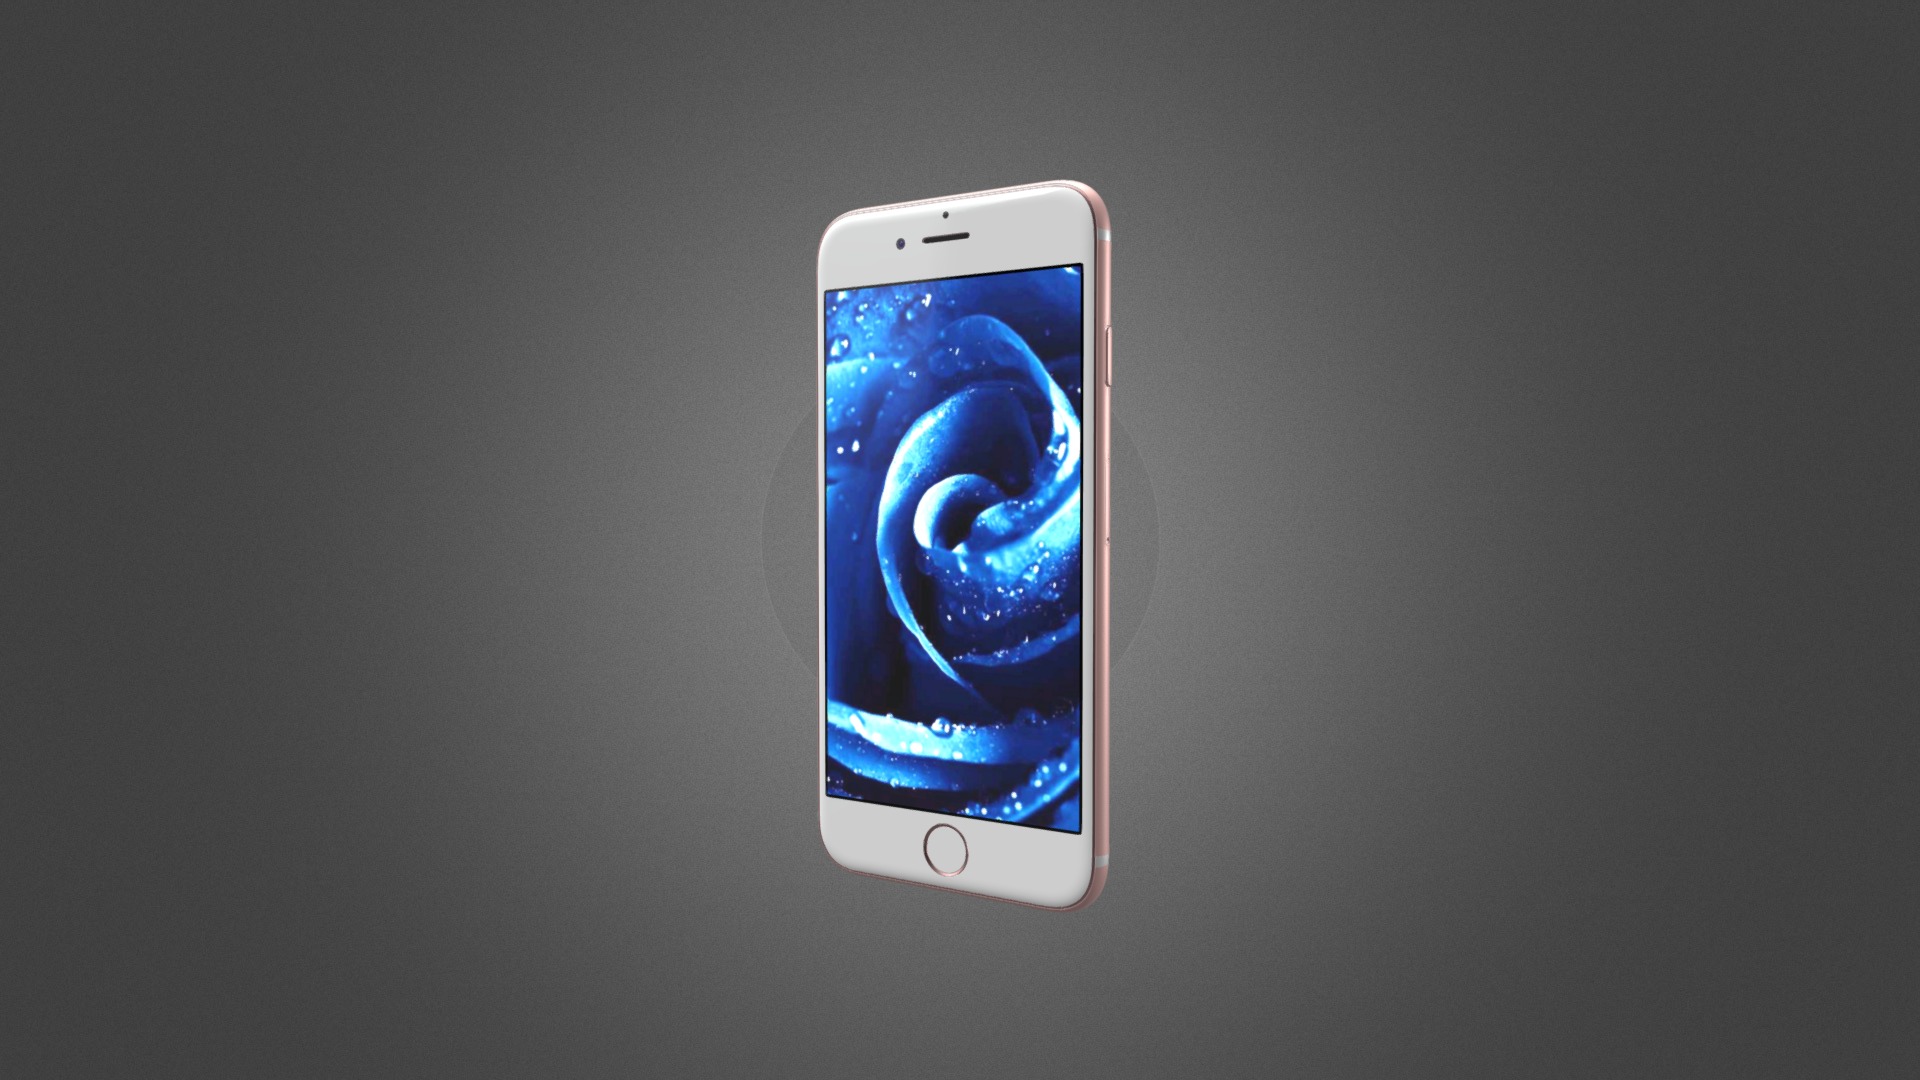 3D model Apple iPhone 7 for Element 3D - This is a 3D model of the Apple iPhone 7 for Element 3D. The 3D model is about a cell phone with a blue light.